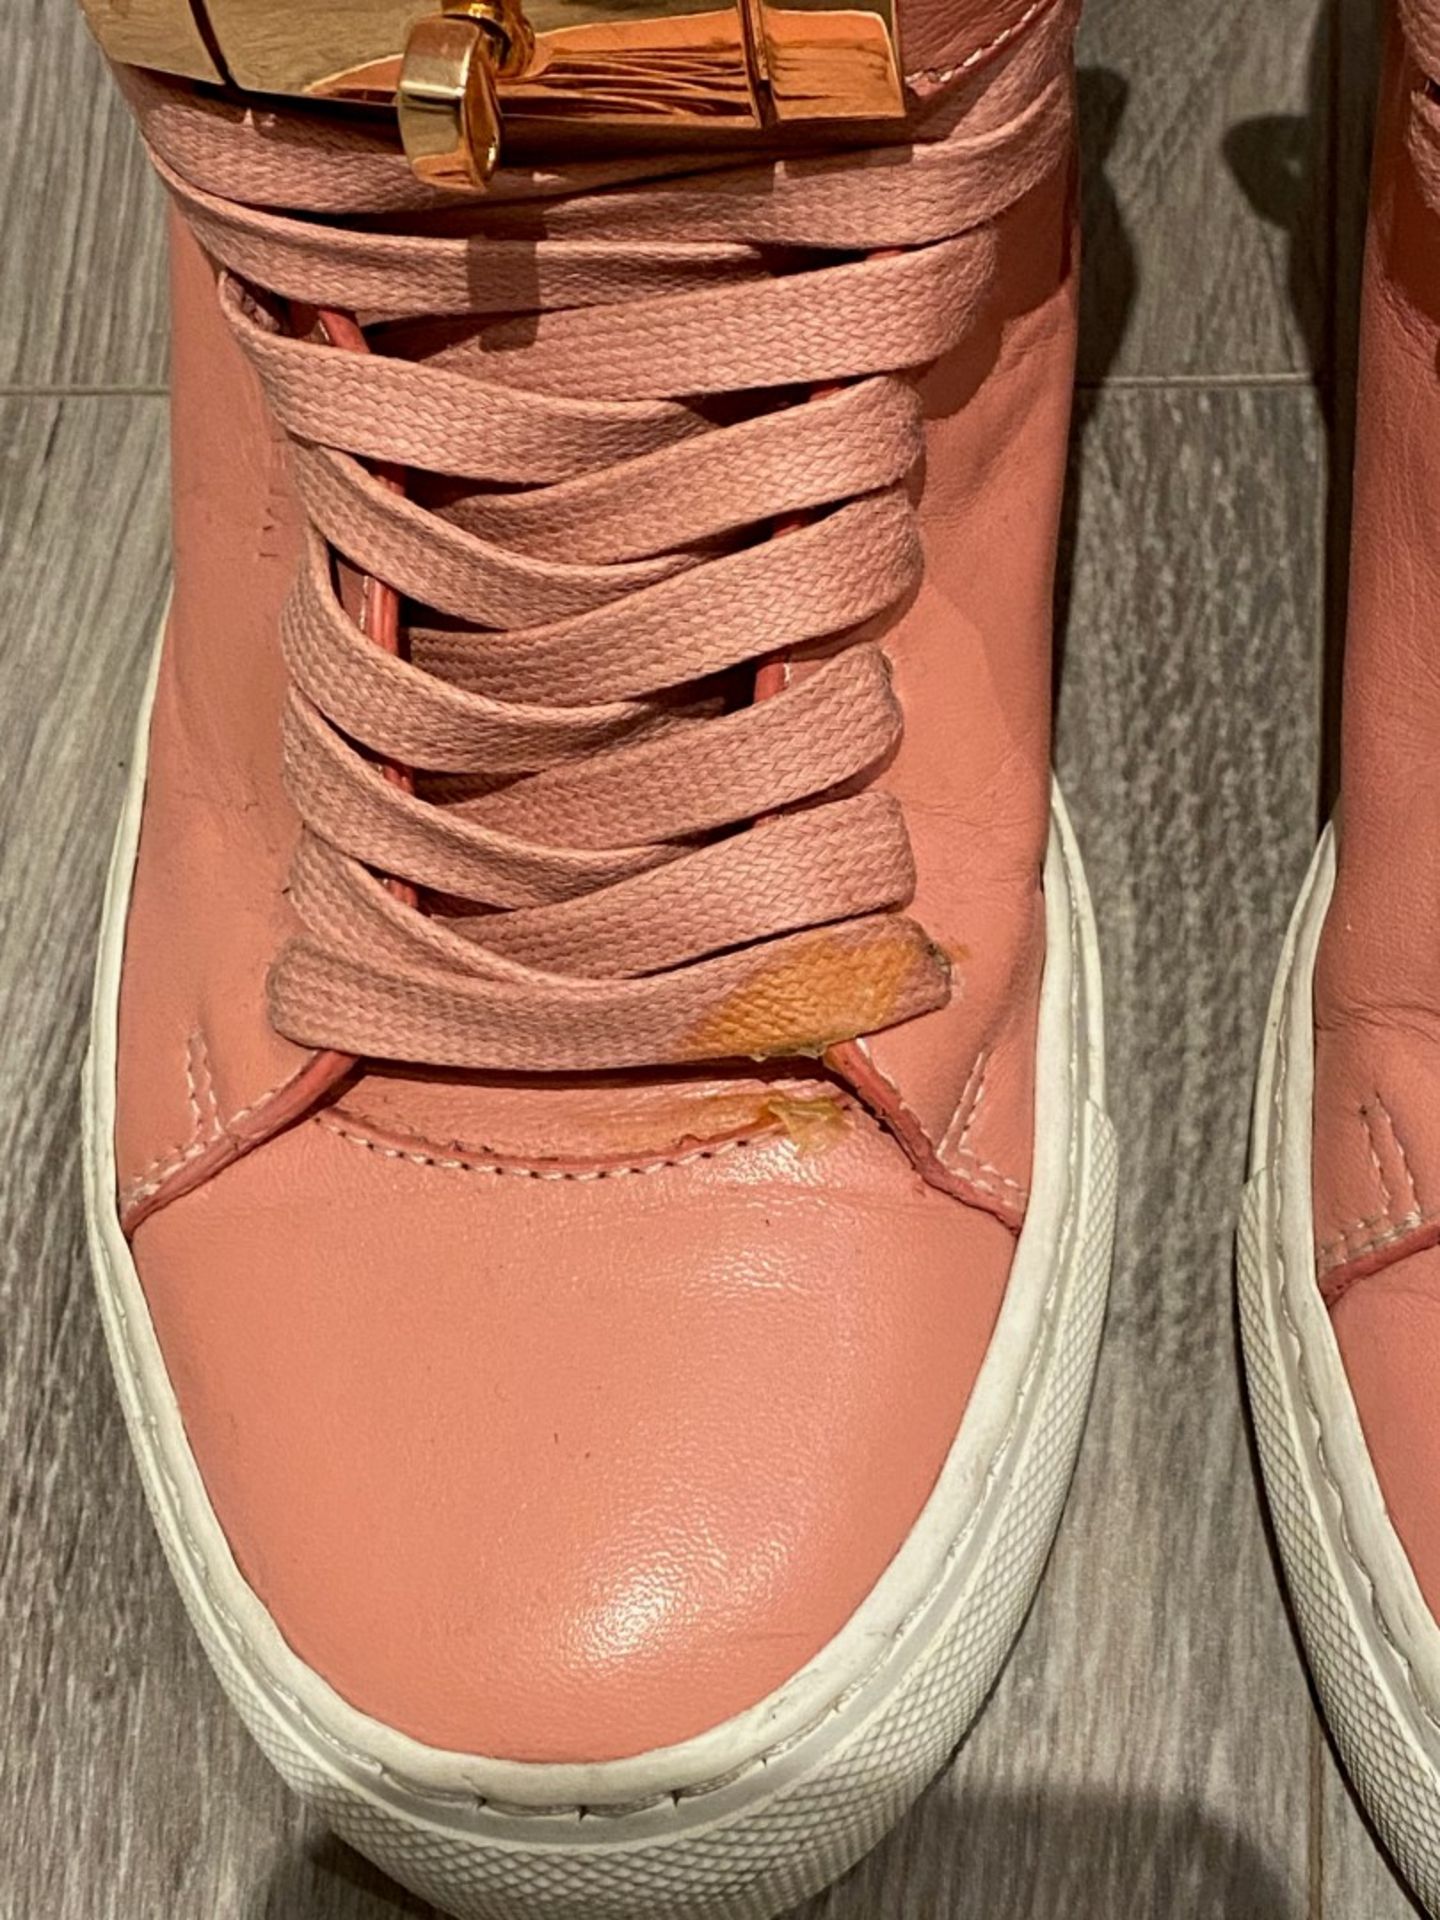 1 x Pair Of Genuine Buscemi Sneakers In Pink - Size: 36 - Preowned in Worn Condition - Ref: LOT22 - - Image 3 of 5